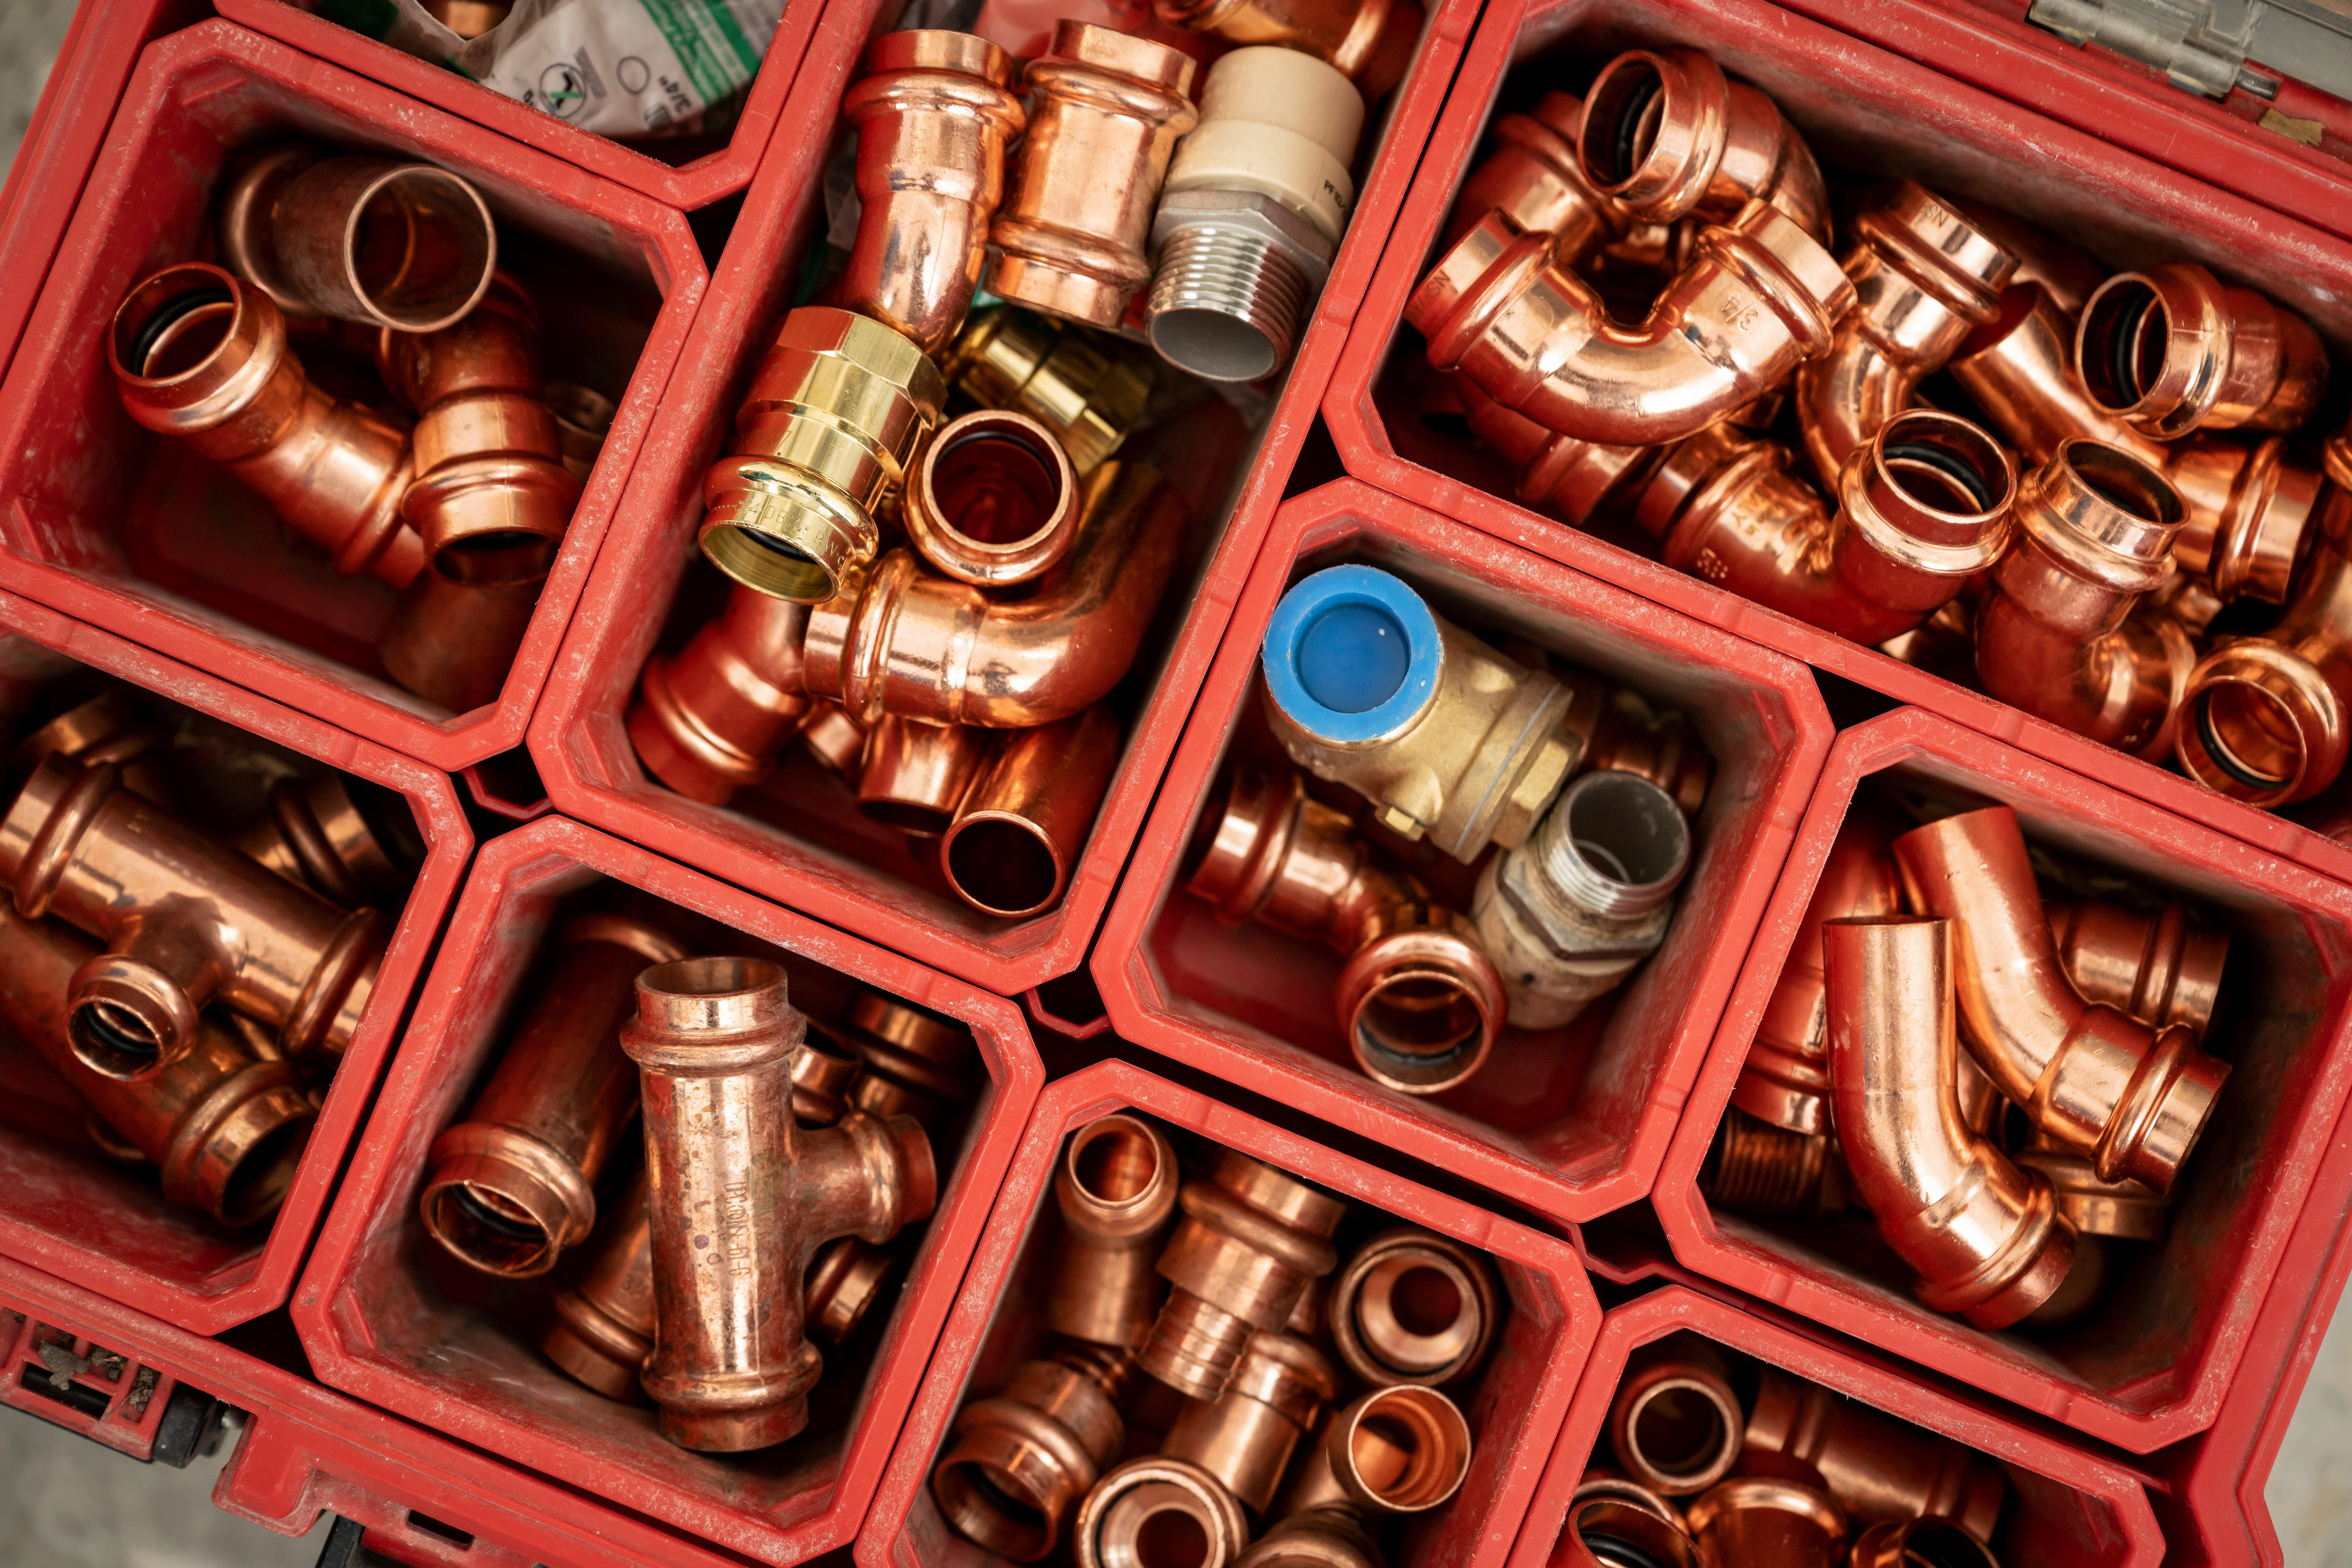 Plumbing parts, pipe, valves and fittings separated in a red toolbox